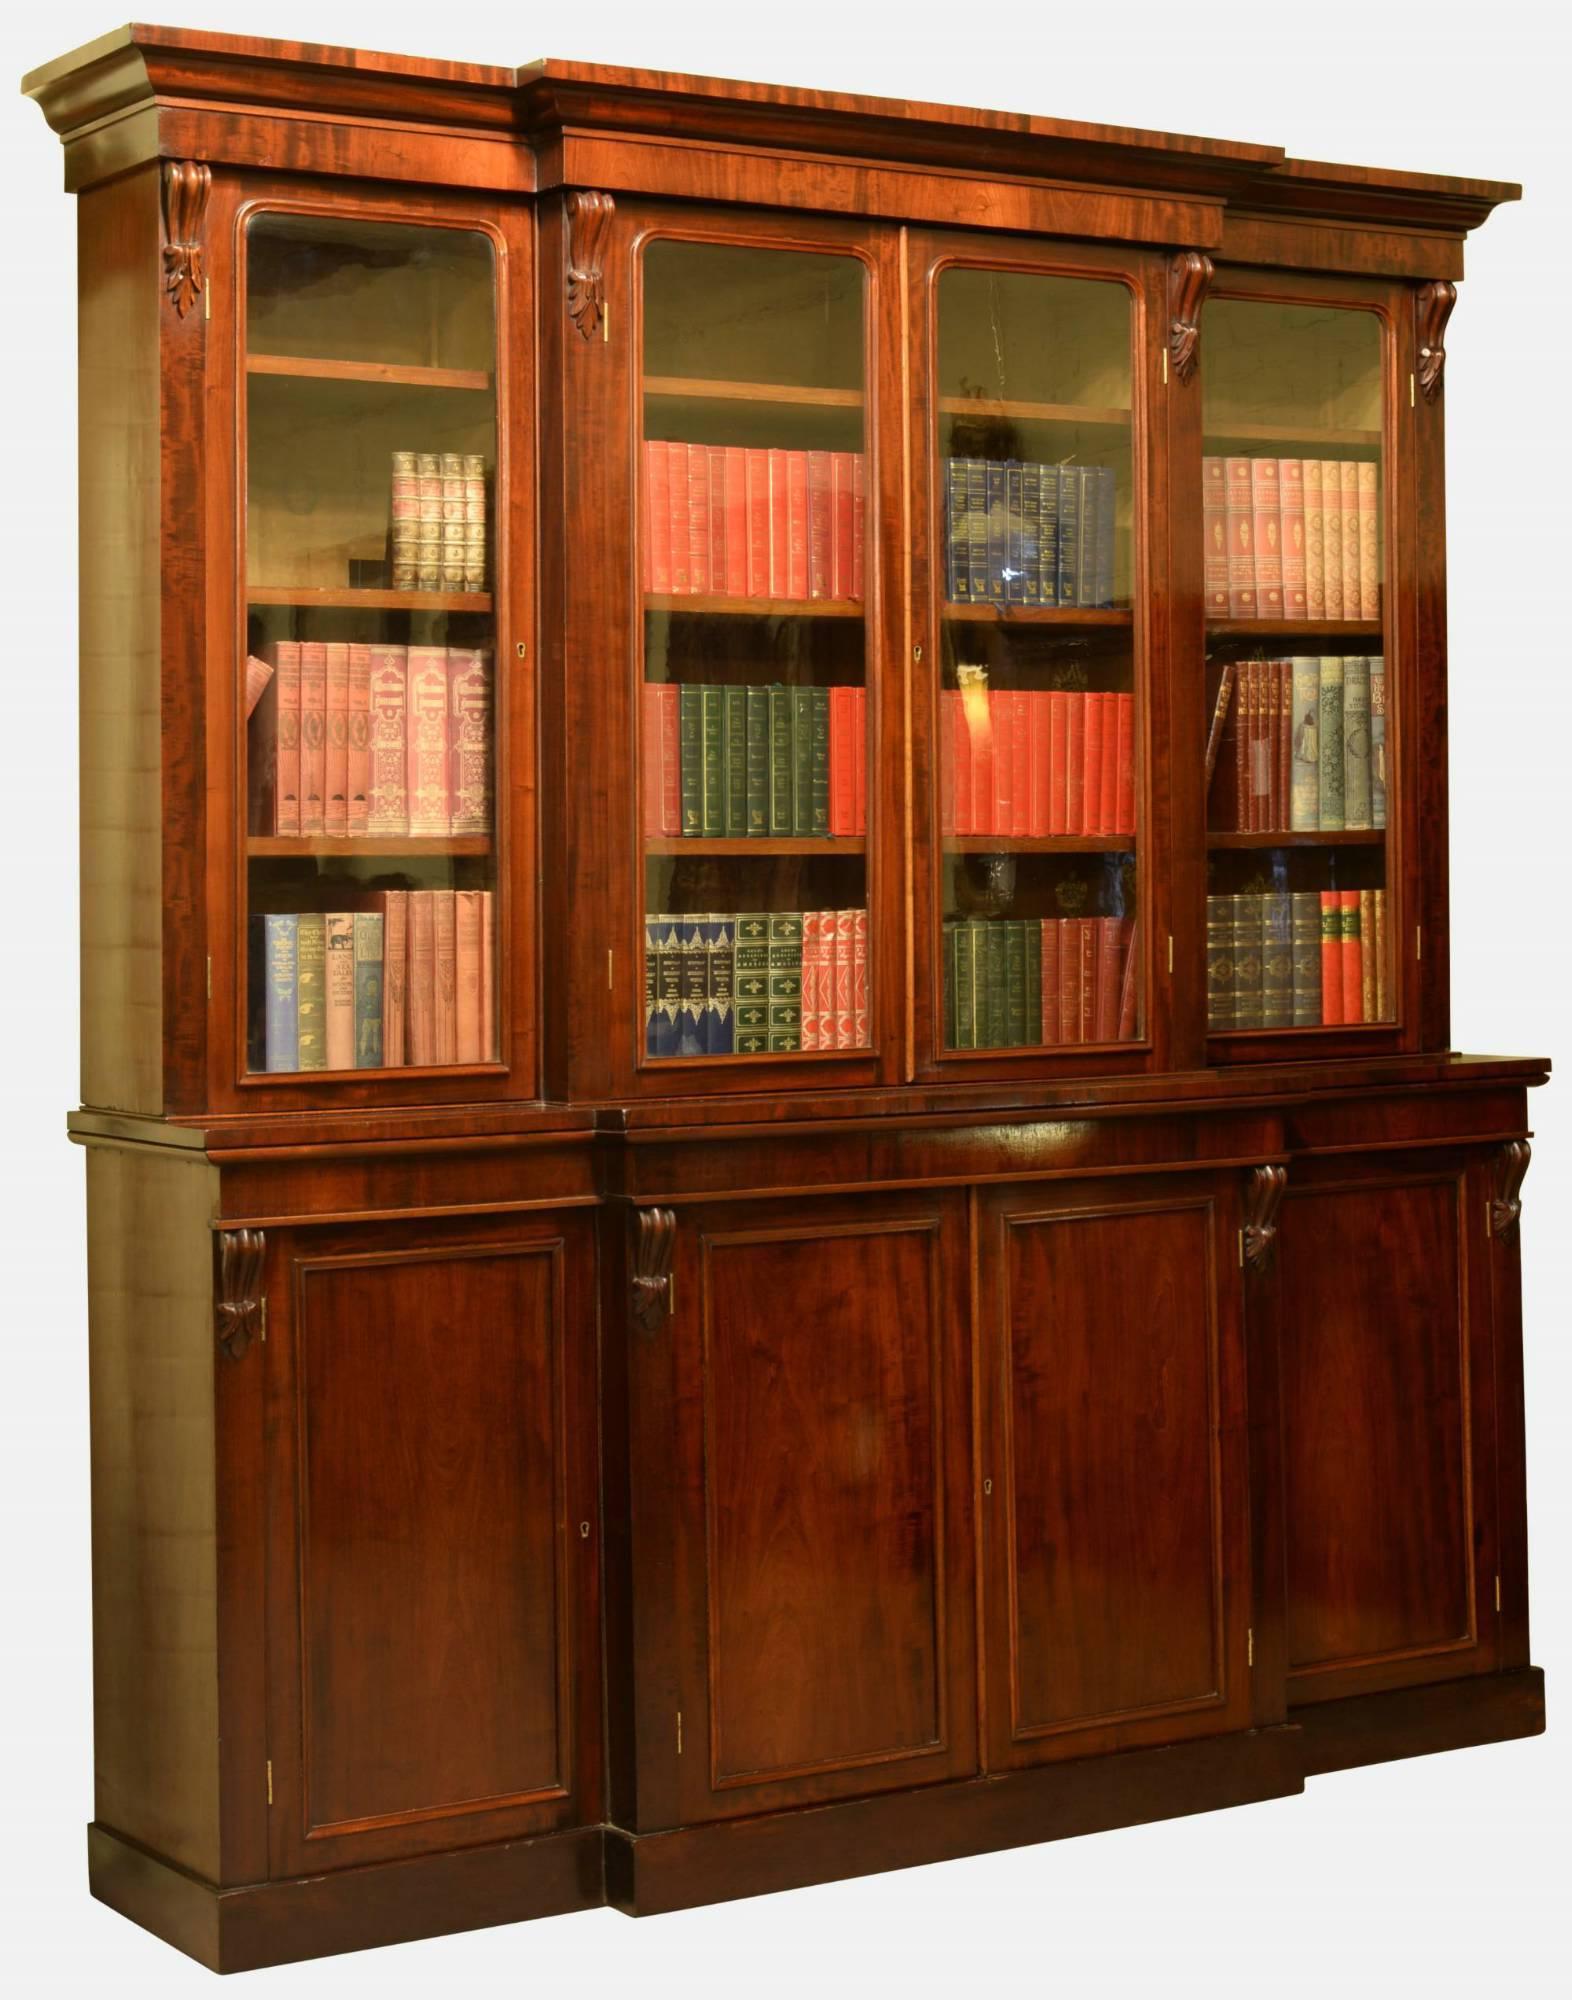 A substantial Victorian mahogany breakfront bookcase with well figured veneers, circa 1870.